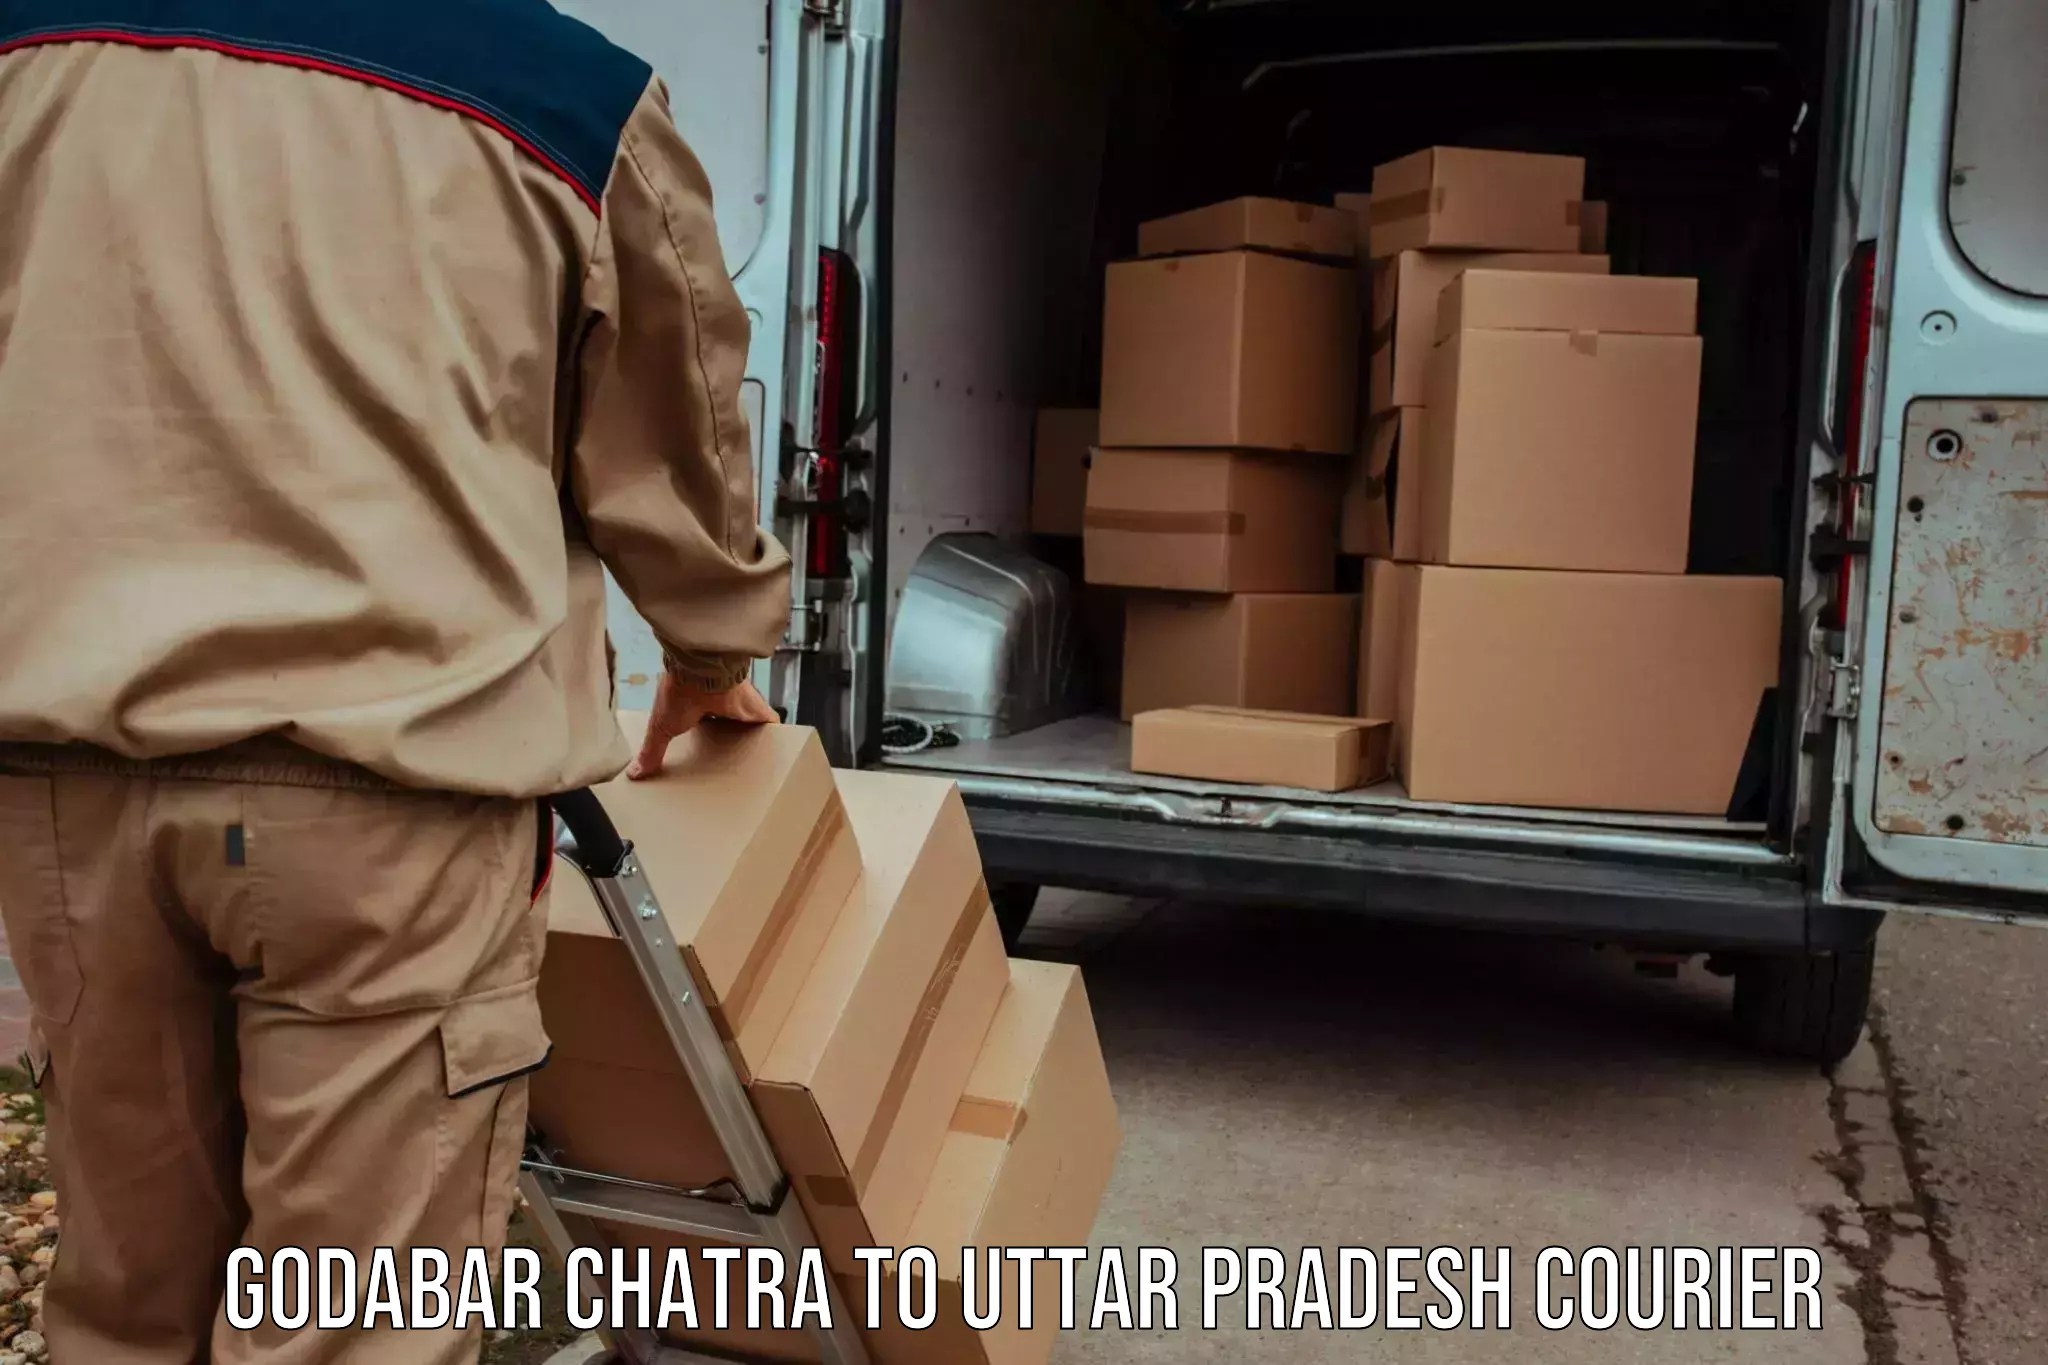 Package delivery network Godabar Chatra to Saifai